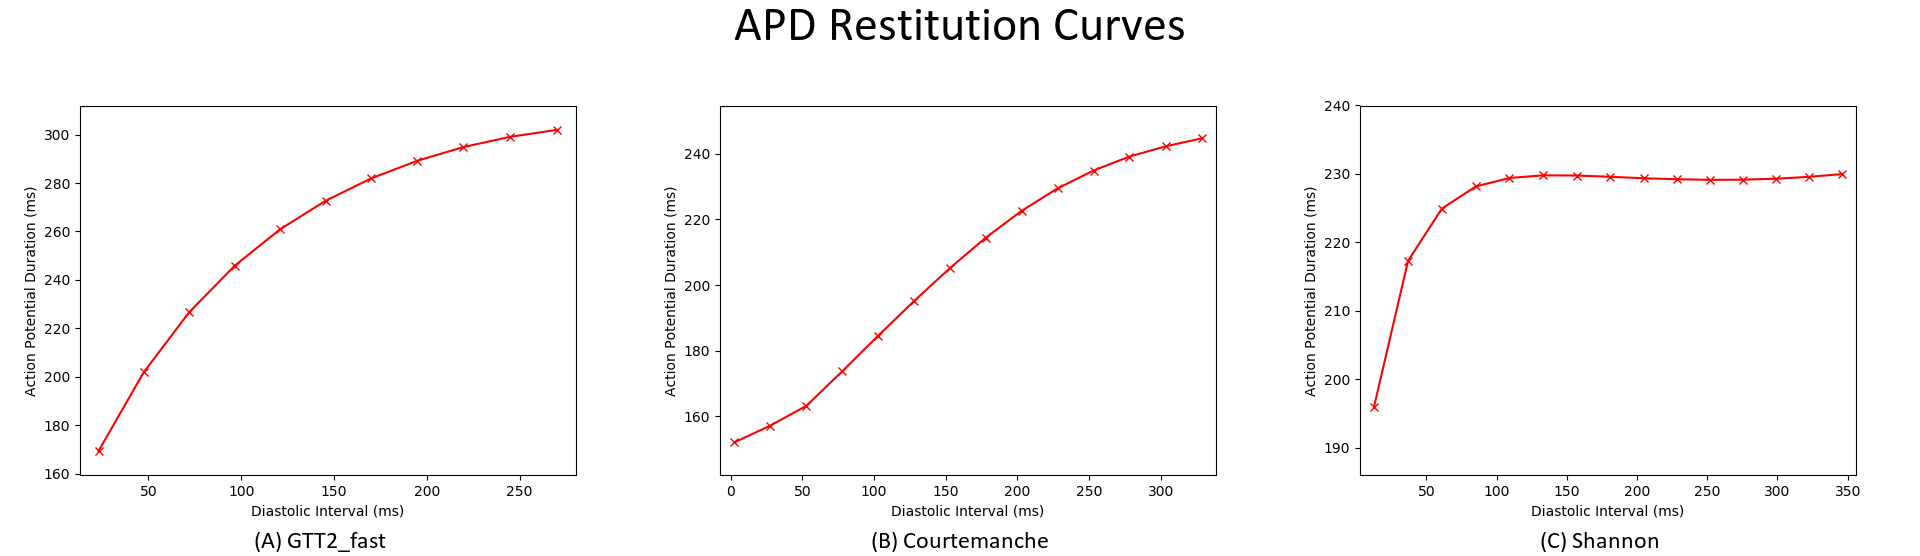 ../../_images/01_EP_02_APD_res_curves.png